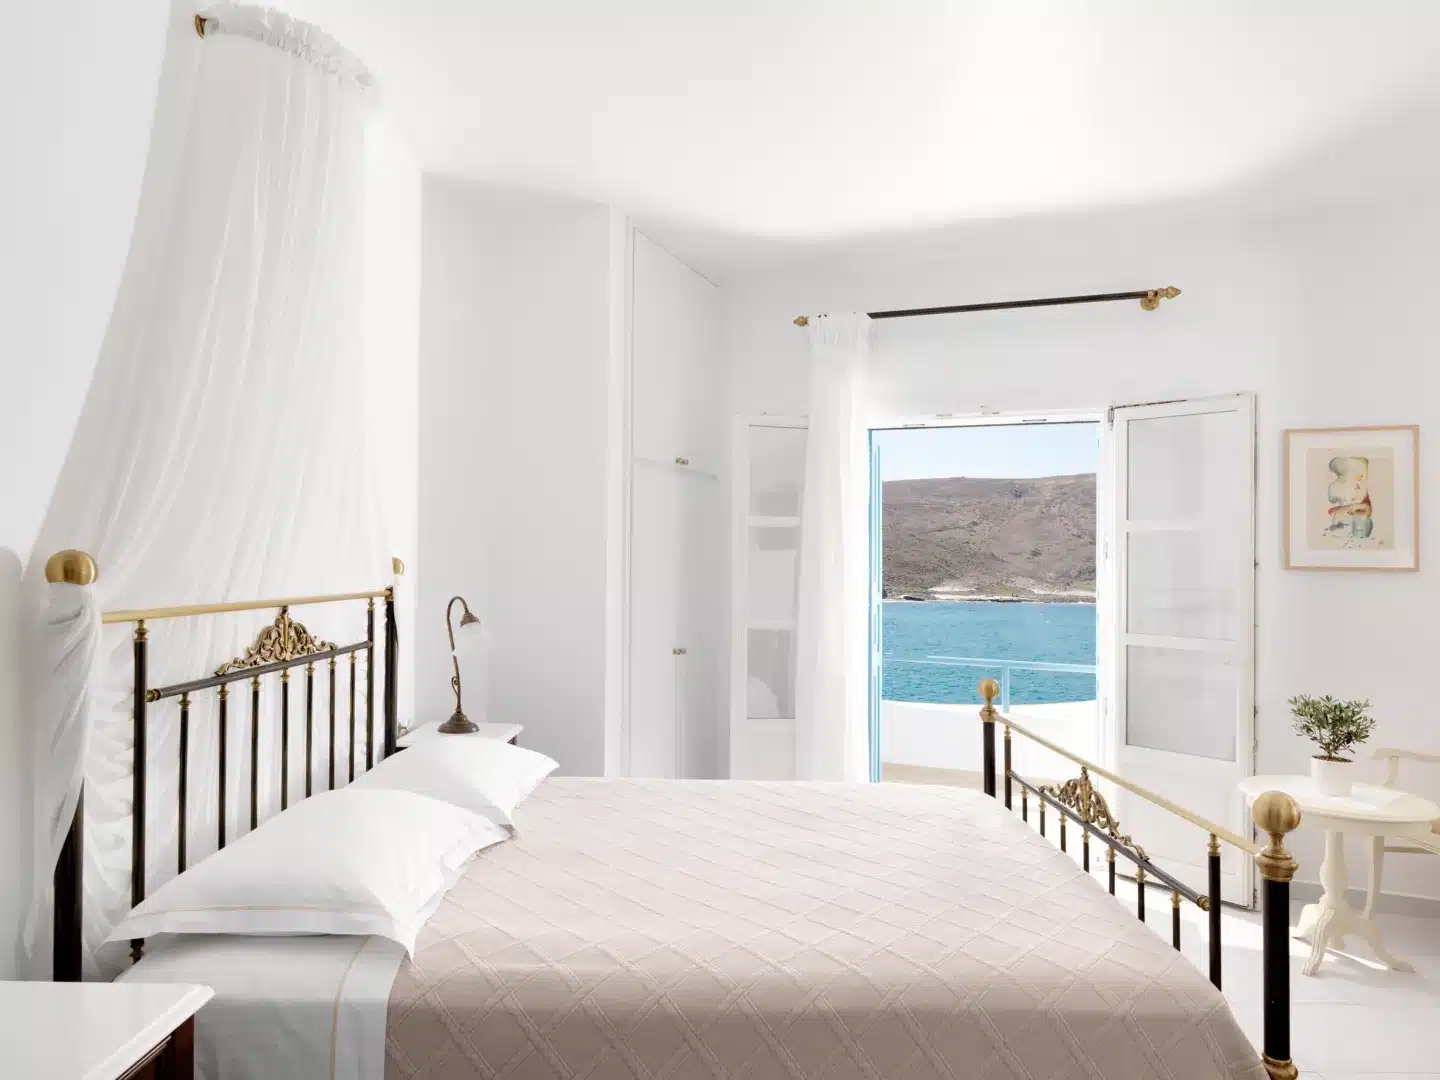 Pictures of a bed and an open door with the view of the ocean. 